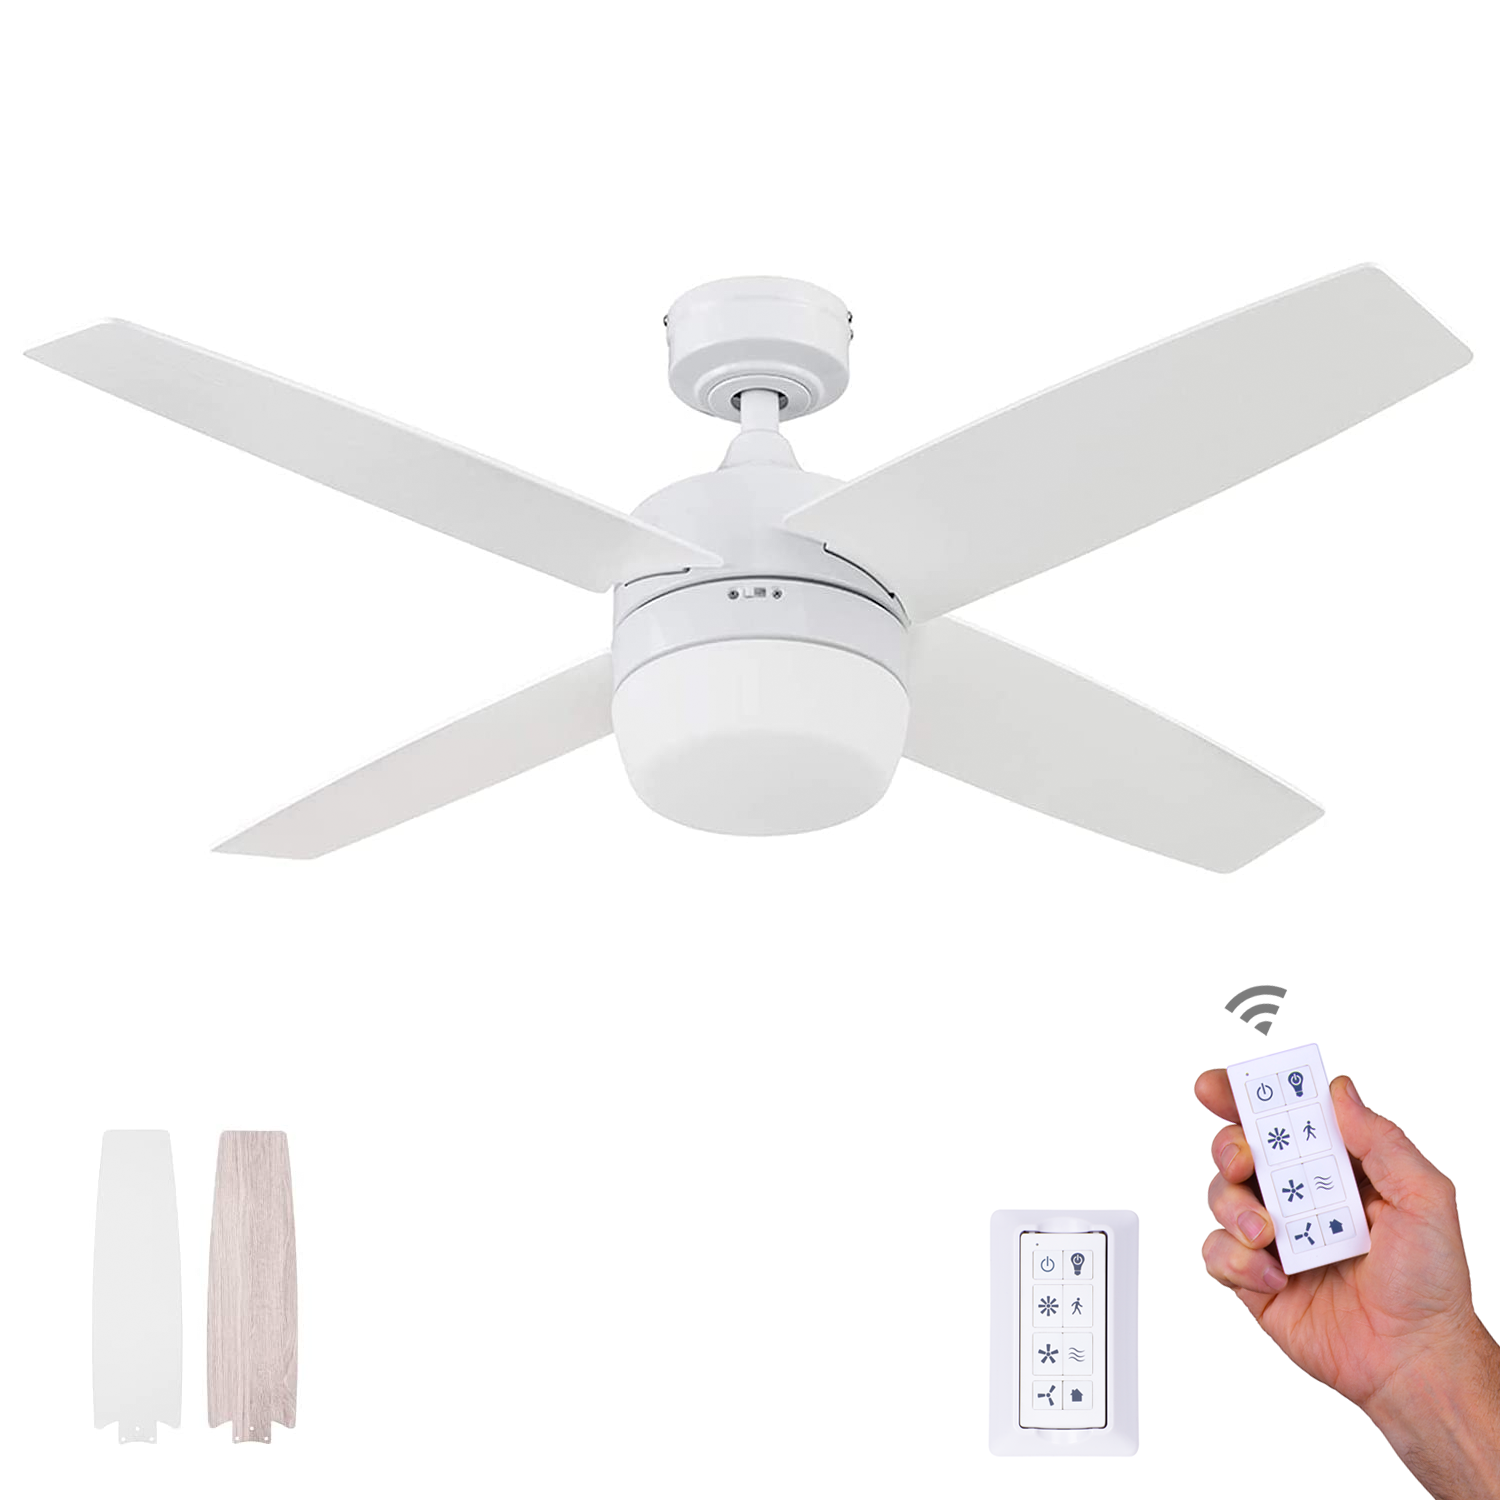 44 Inch Atlas, Bright White, Remote Control, Ceiling Fan by Prominence Home